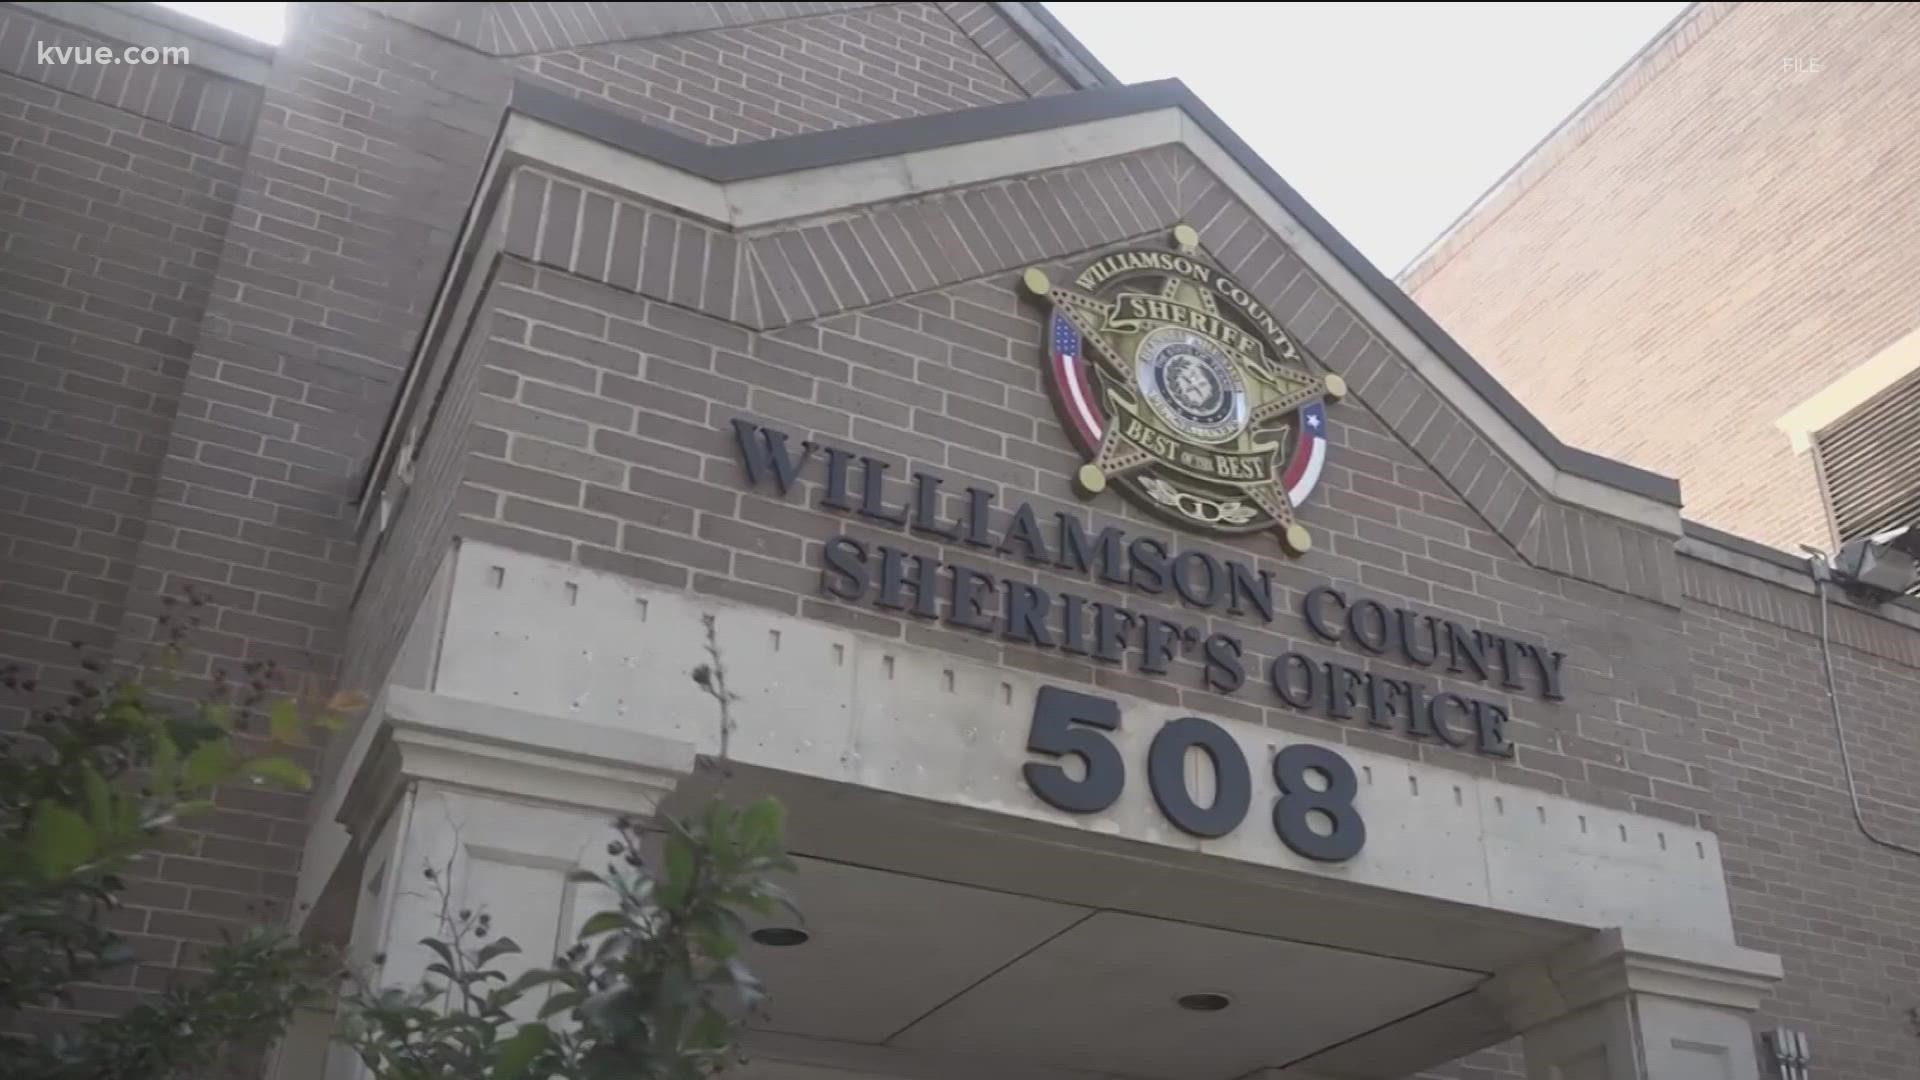 The Williamson County Sheriff's Office says low funding is pushing away the best deputies.